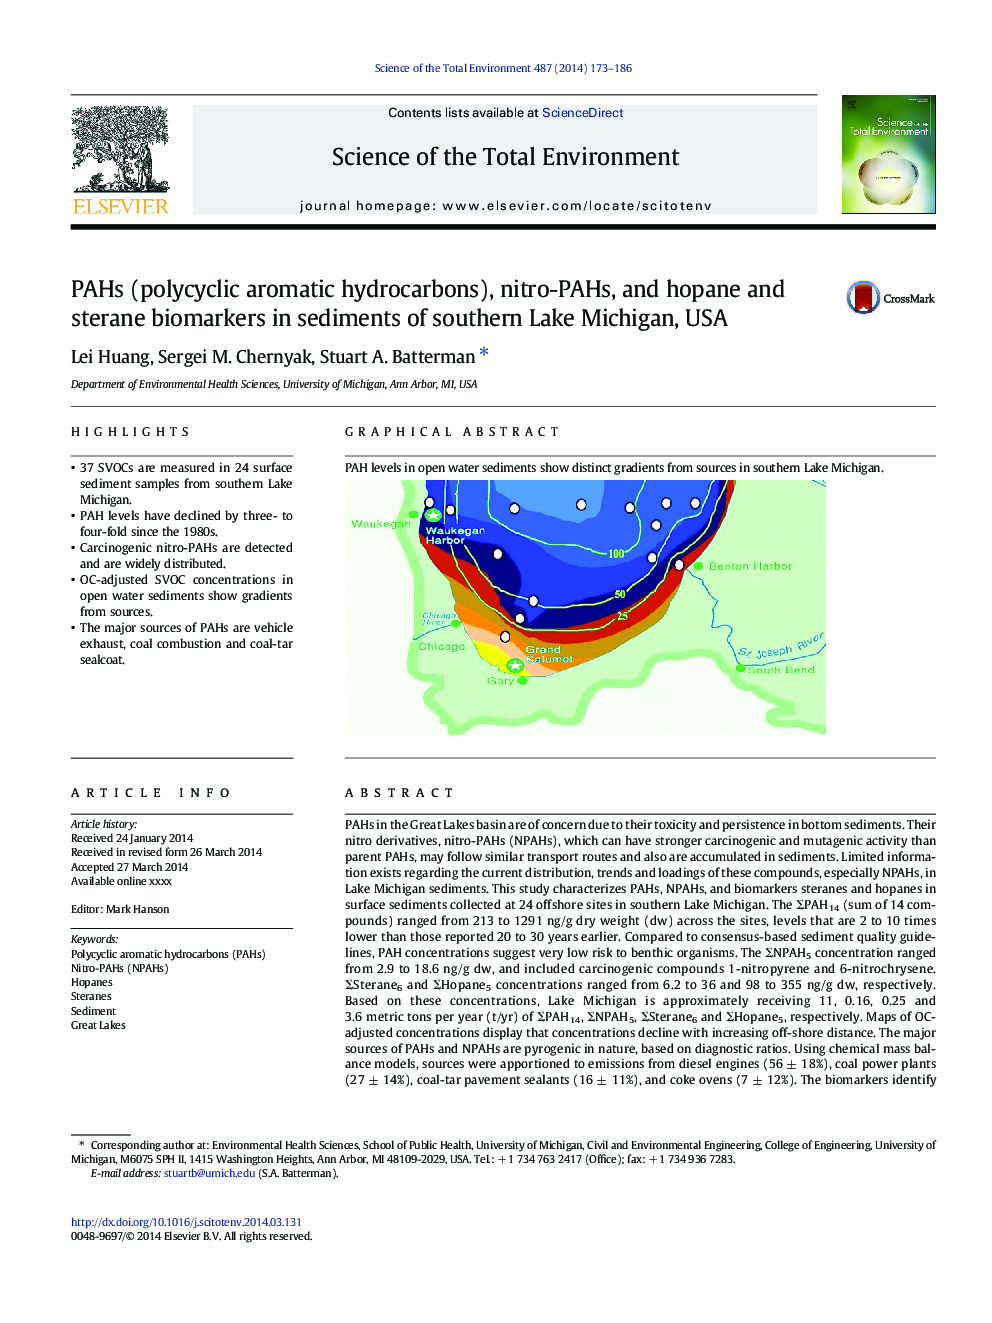 PAHs (polycyclic aromatic hydrocarbons), nitro-PAHs, and hopane and sterane biomarkers in sediments of southern Lake Michigan, USA